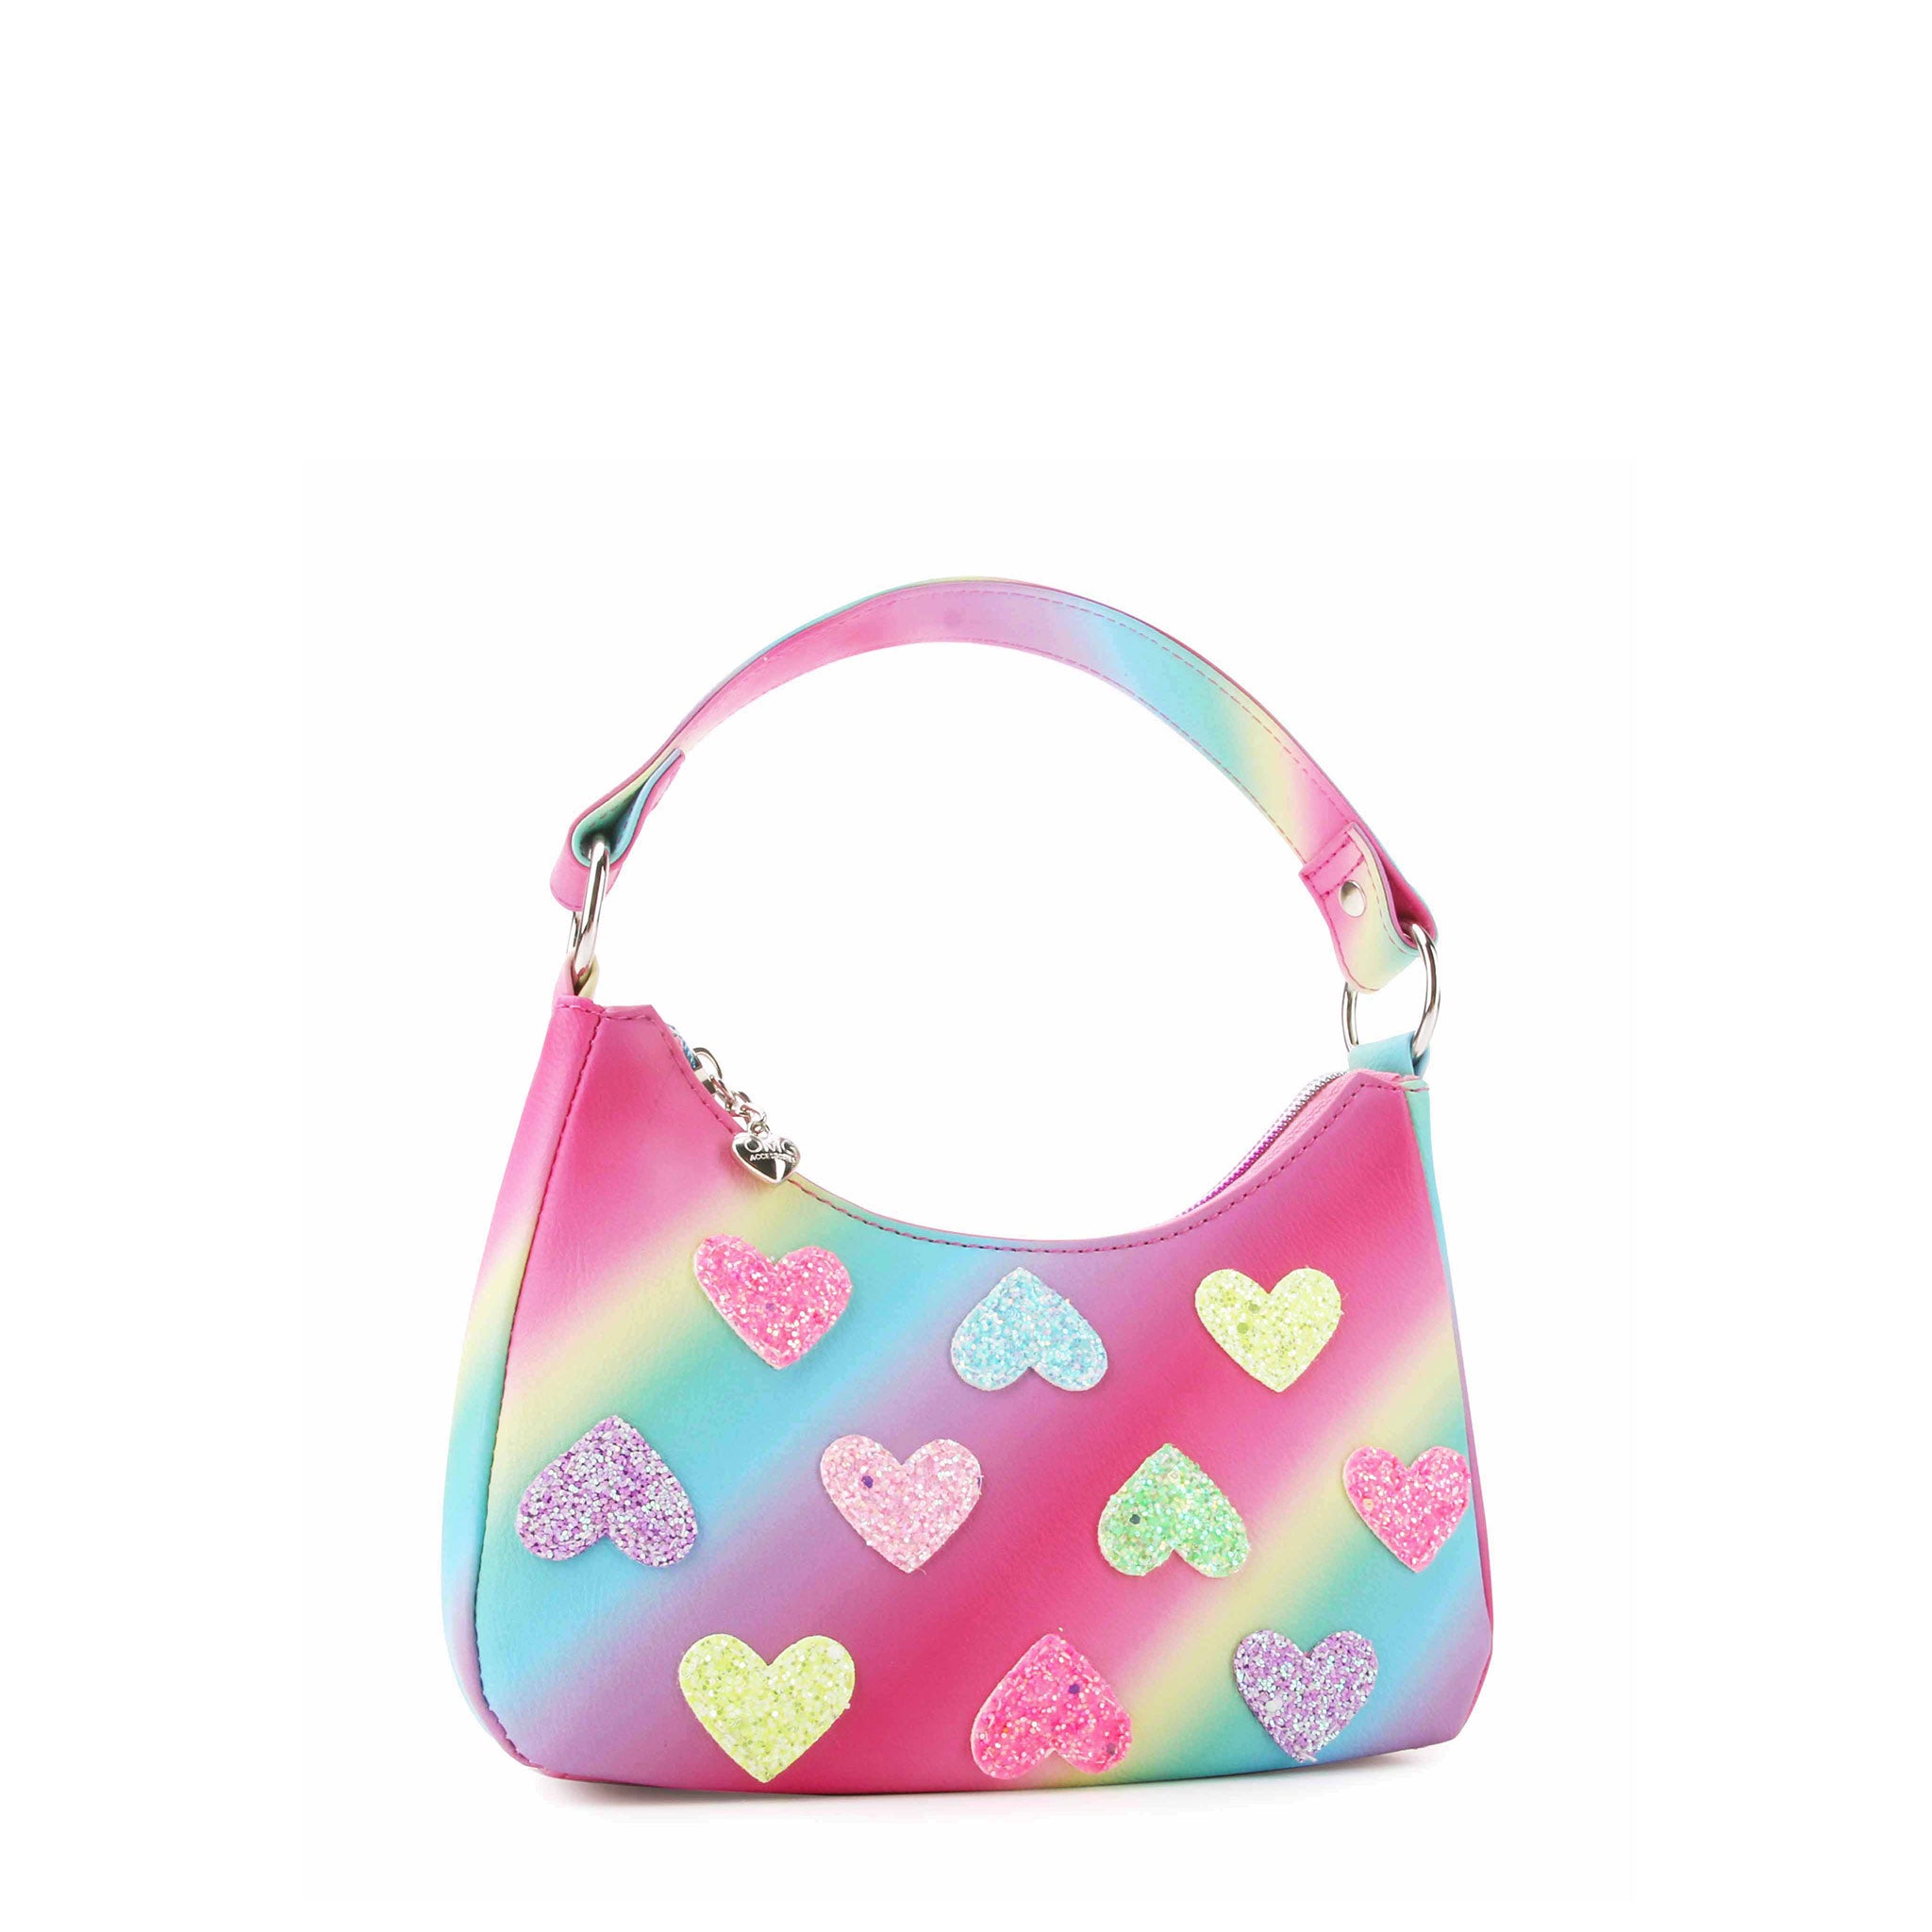 Side view of a rainbow ombre striped mini hobo bag with glitter heart patches